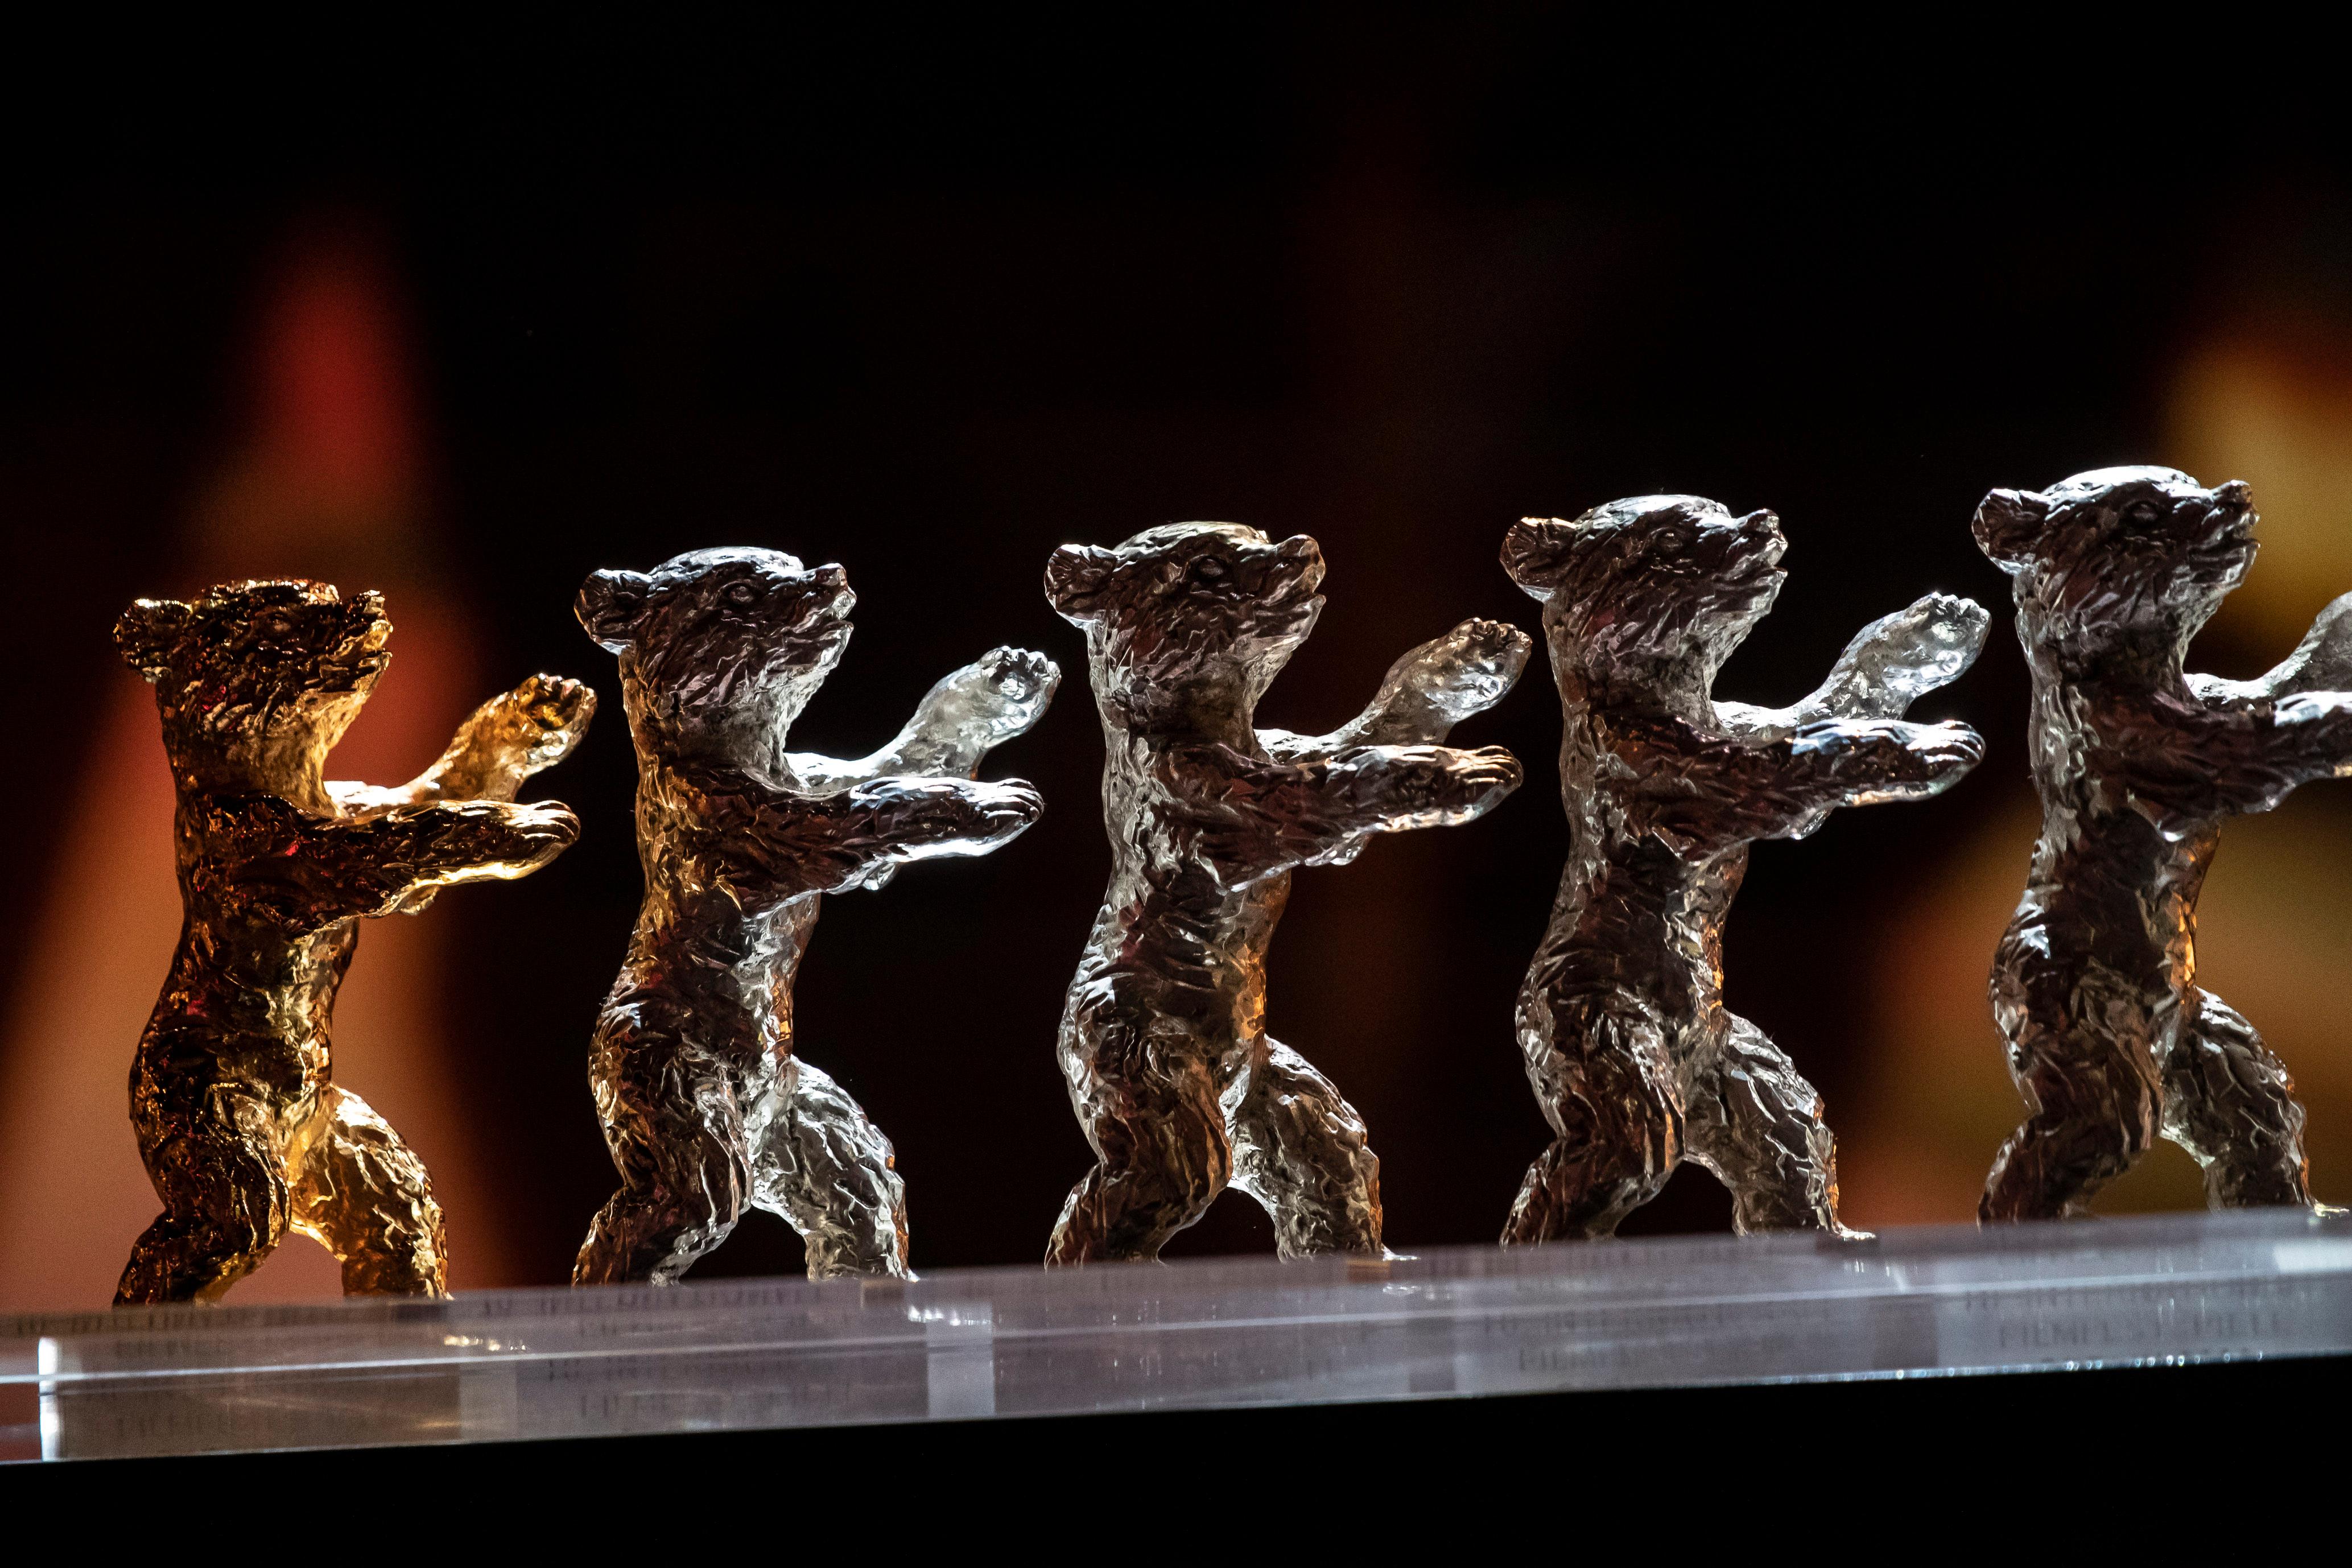 The Golden and Silver Berlinale Bears